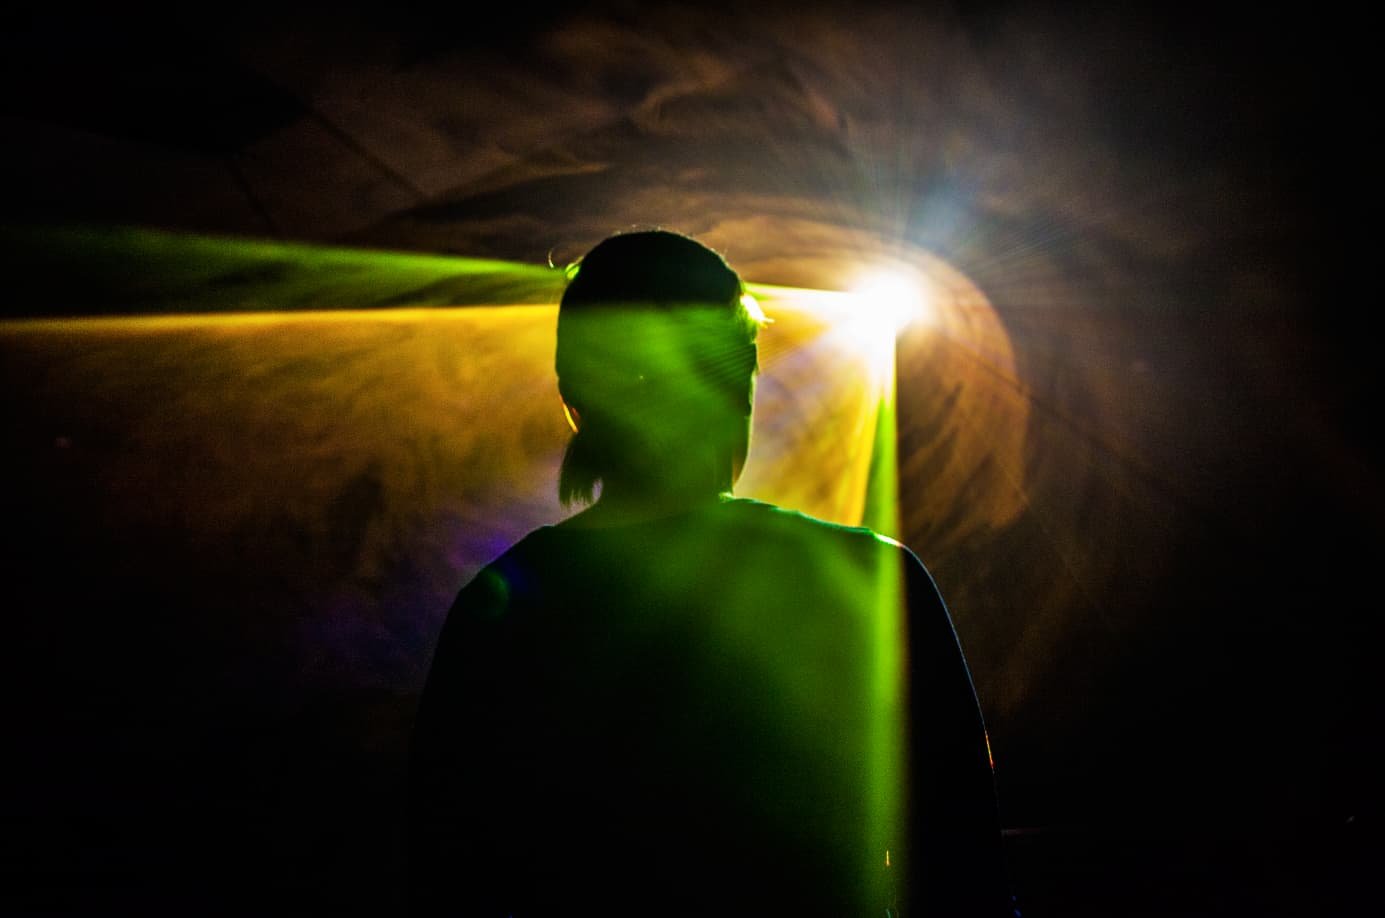 A generative light beam shining against a visitor, standing in an ever-changing experience of nature.